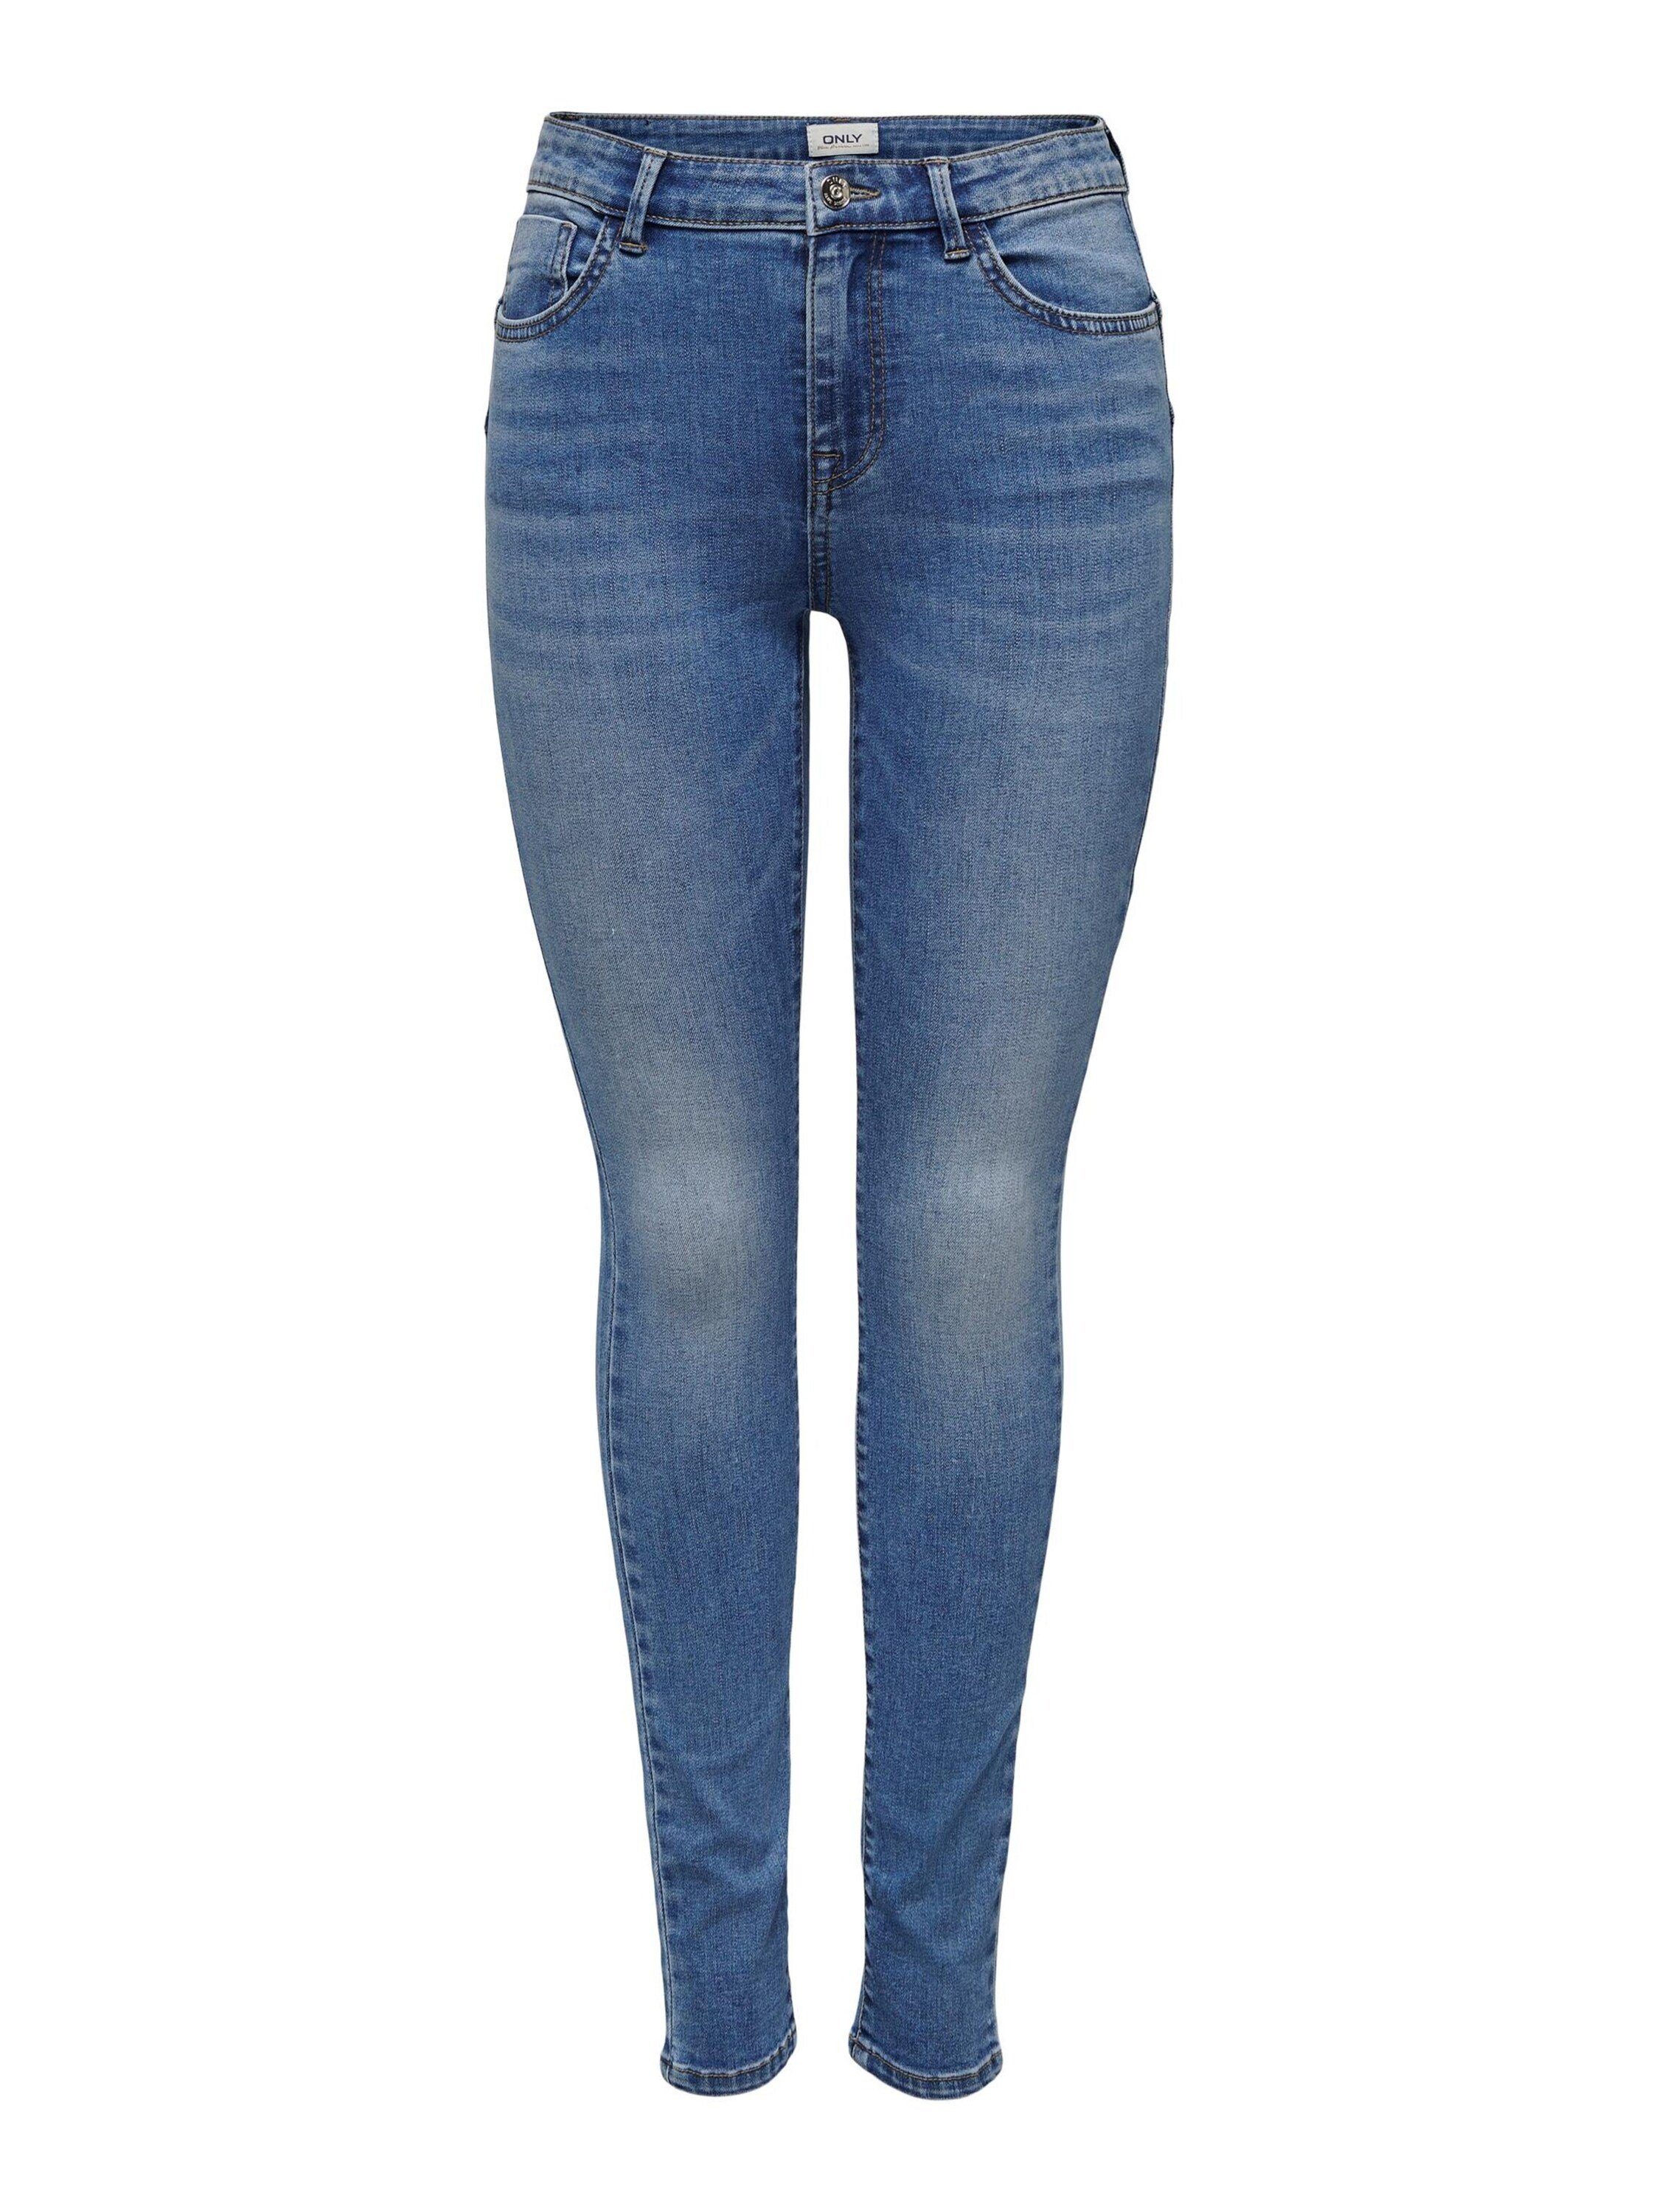 (1-tlg) 7/8-Jeans WAUW Weiteres ONLY Detail Fransen,